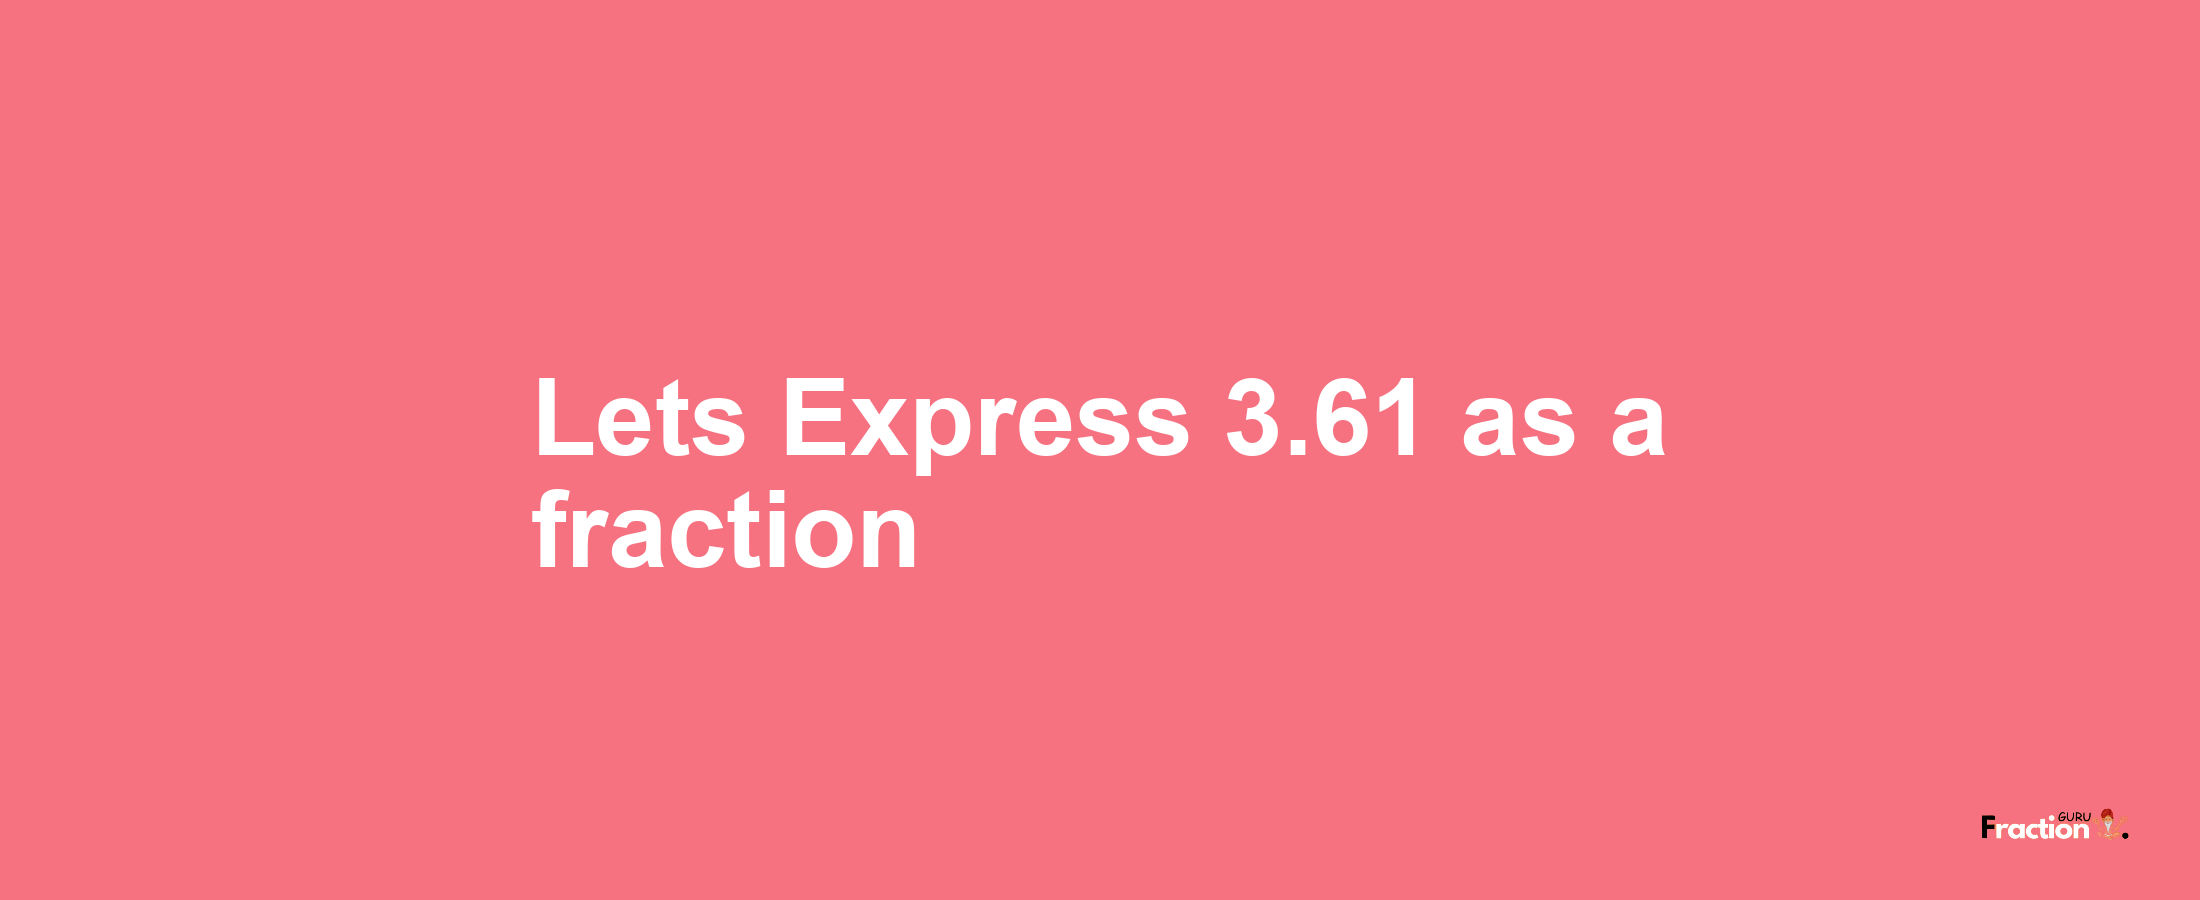 Lets Express 3.61 as afraction